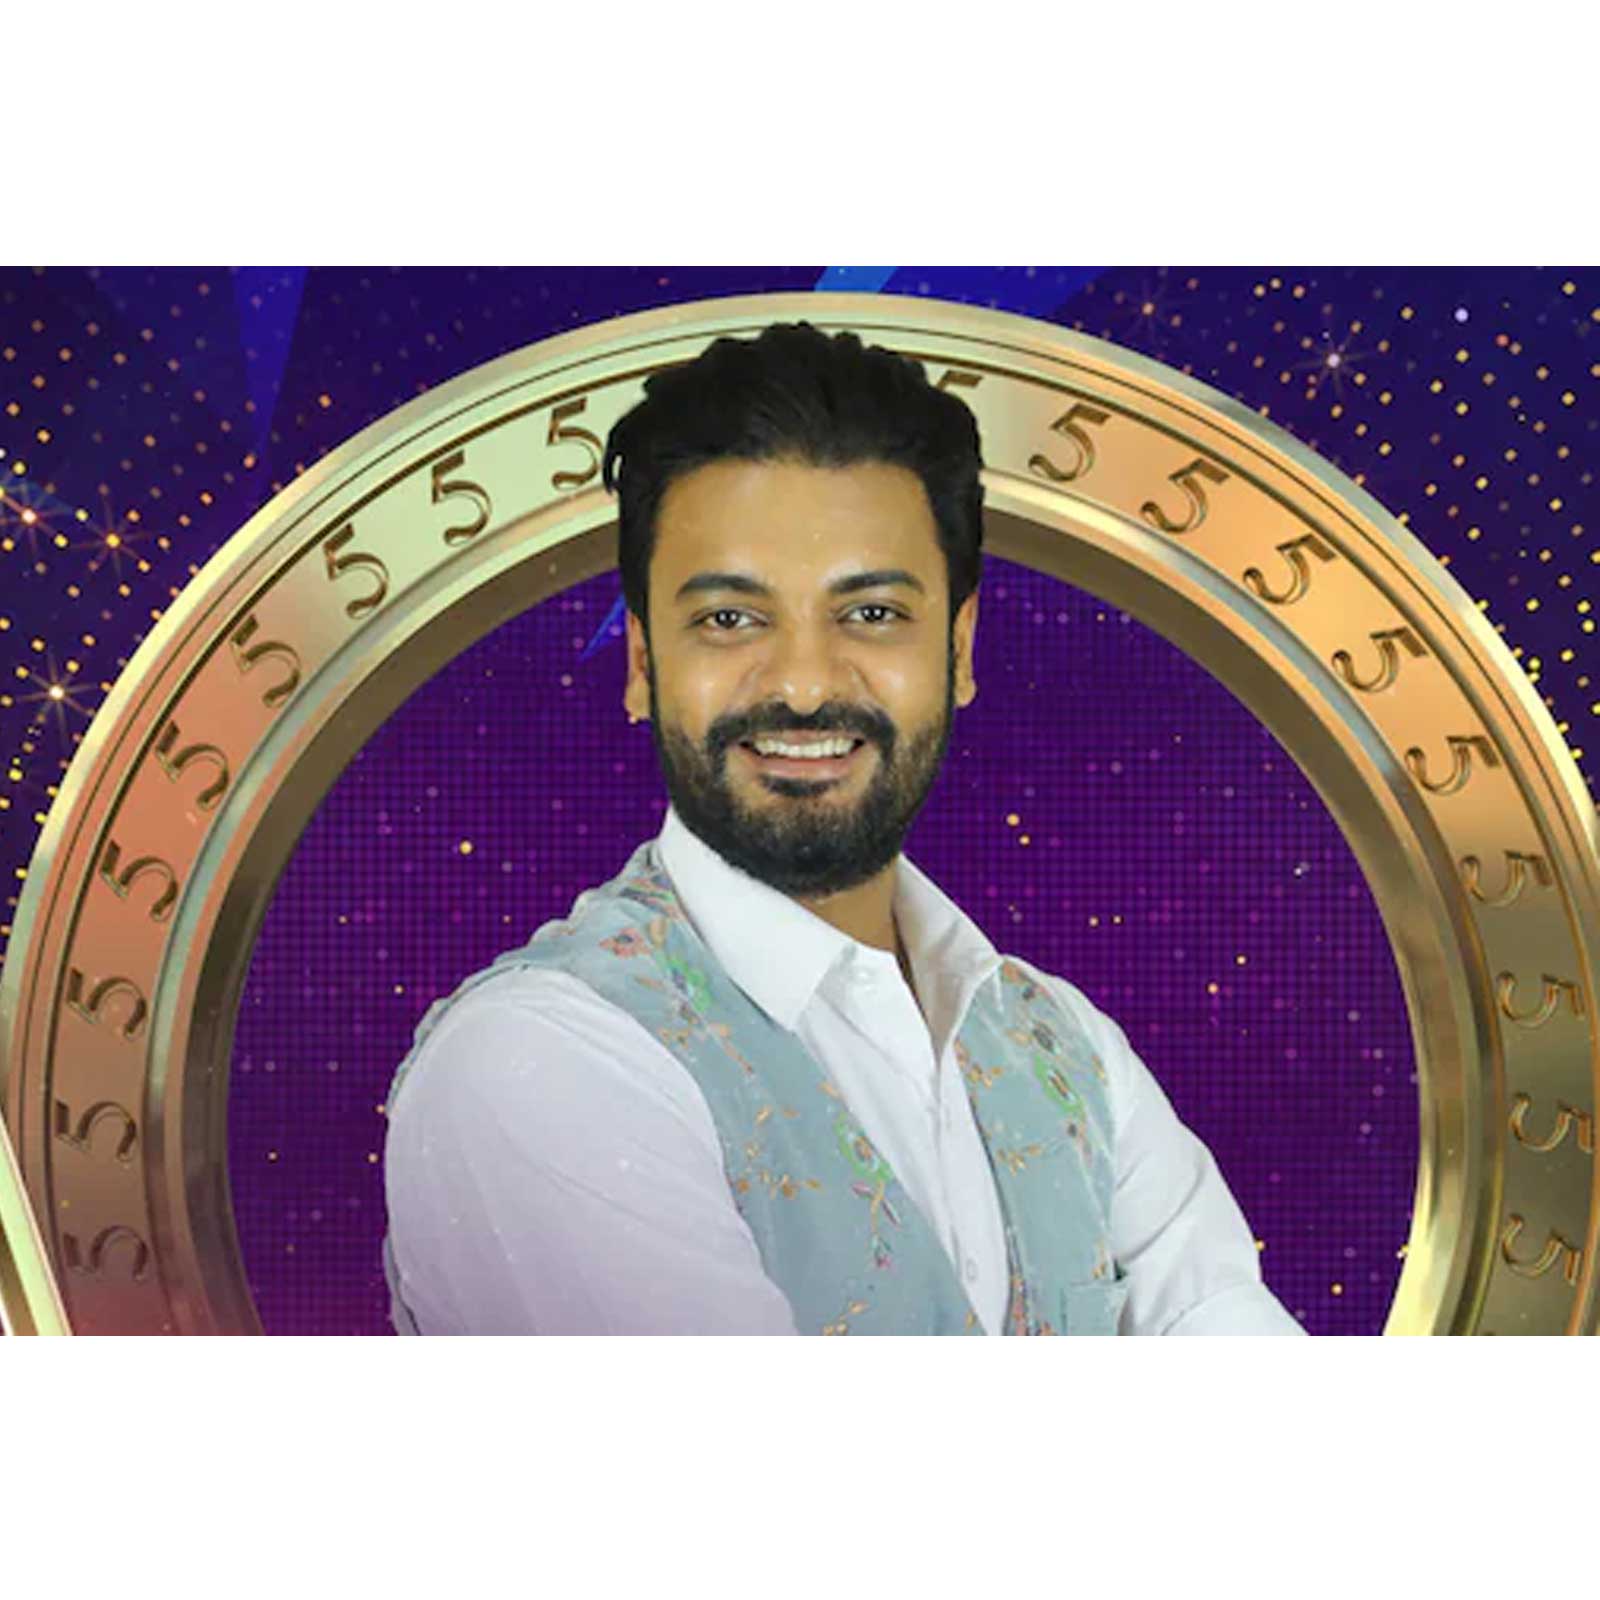 Tamil 5: Abhinay Vaddi, the Actor and Agriculturist Taking Part in Show